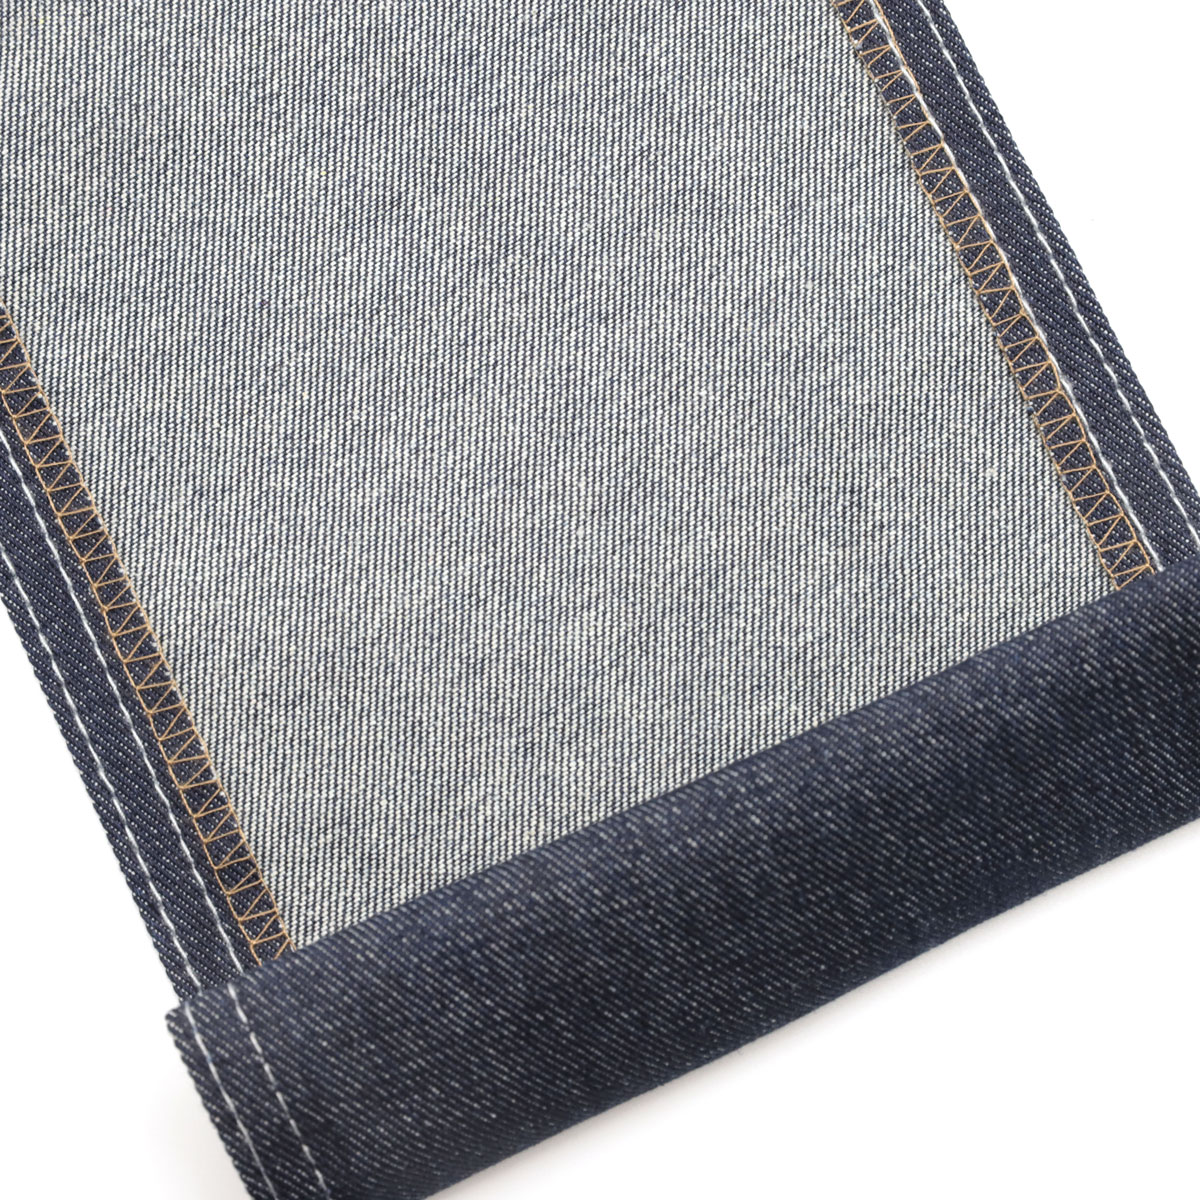 China Denim Fabric - How to Use the Best One for Your Needs 1